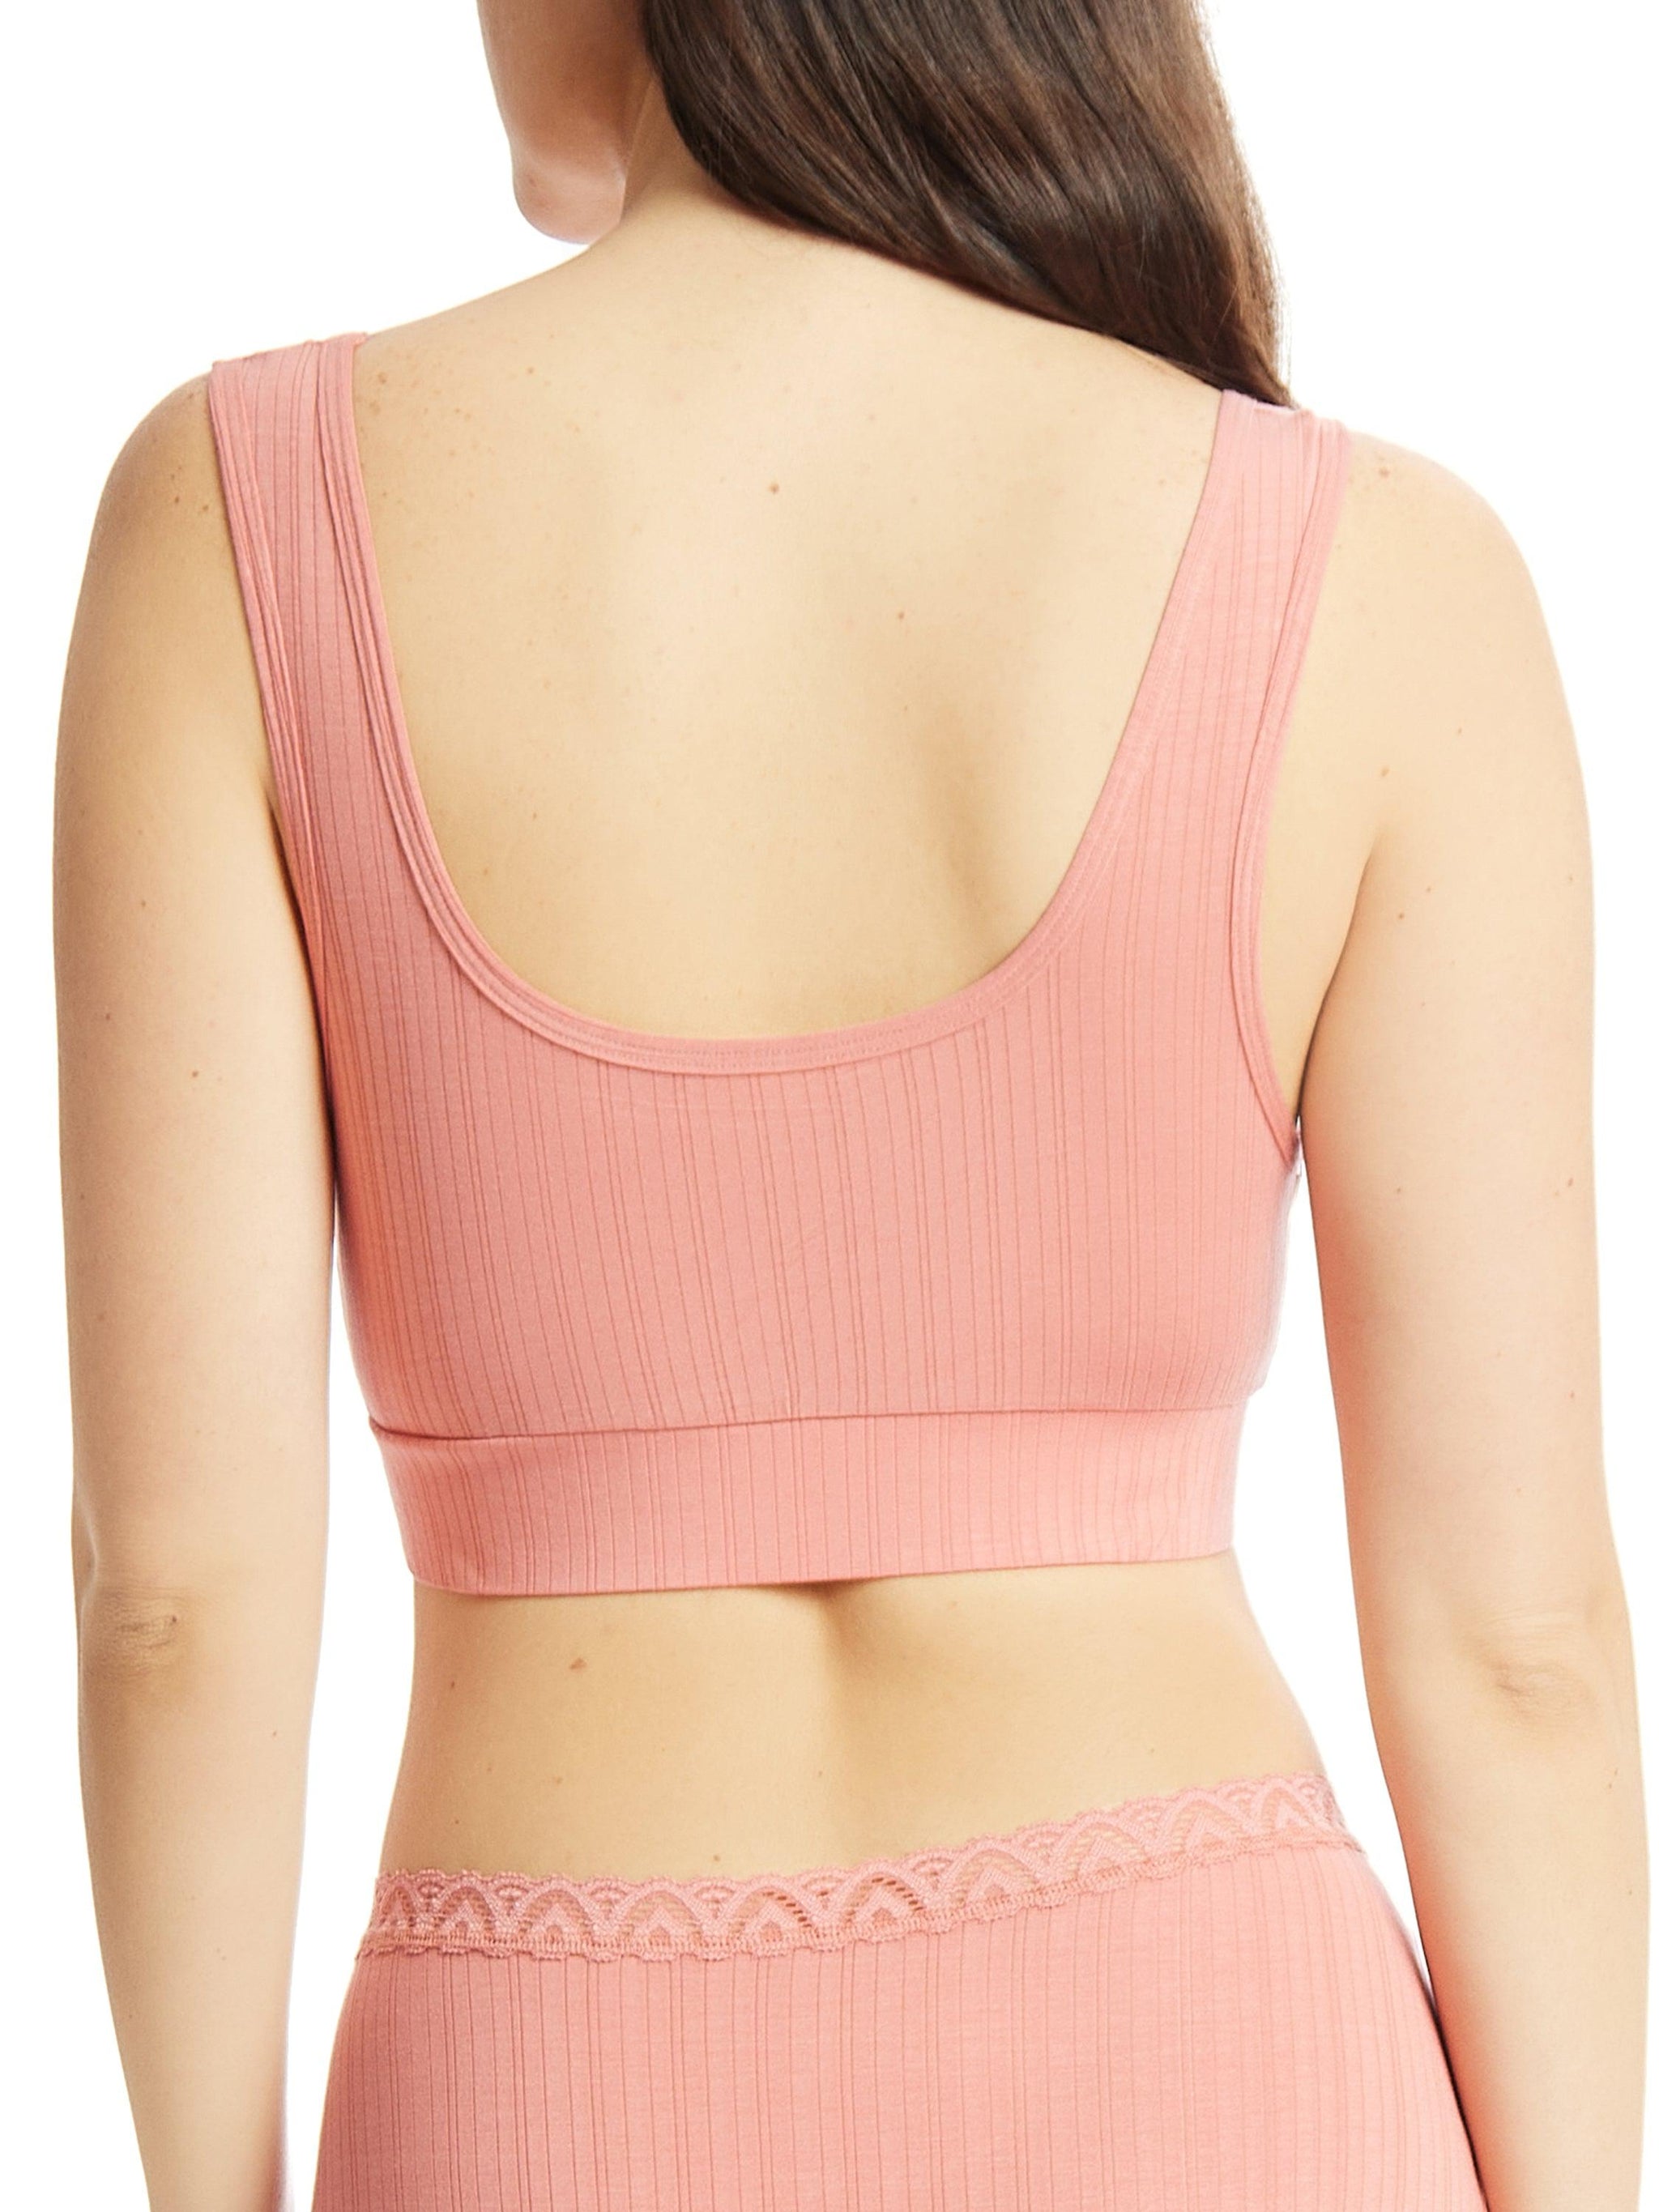 MellowLuxe™ Square Neck Cami Dried Cherry Red Sale